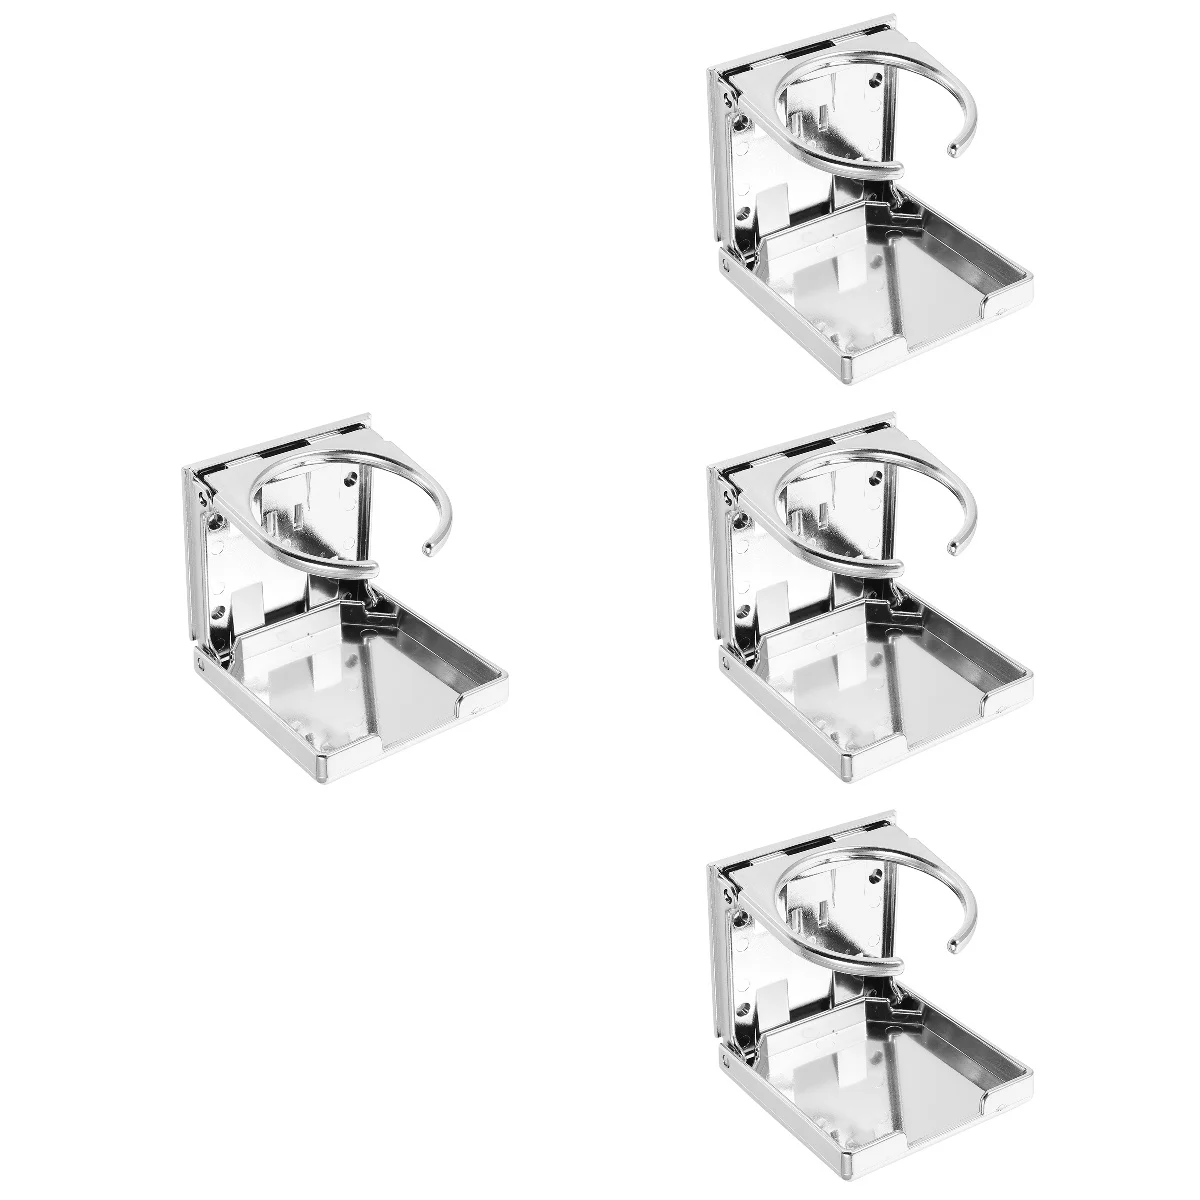 

4pcs Portable Foosball Table Cup Holder External Cup Rack for Foosball Game Table